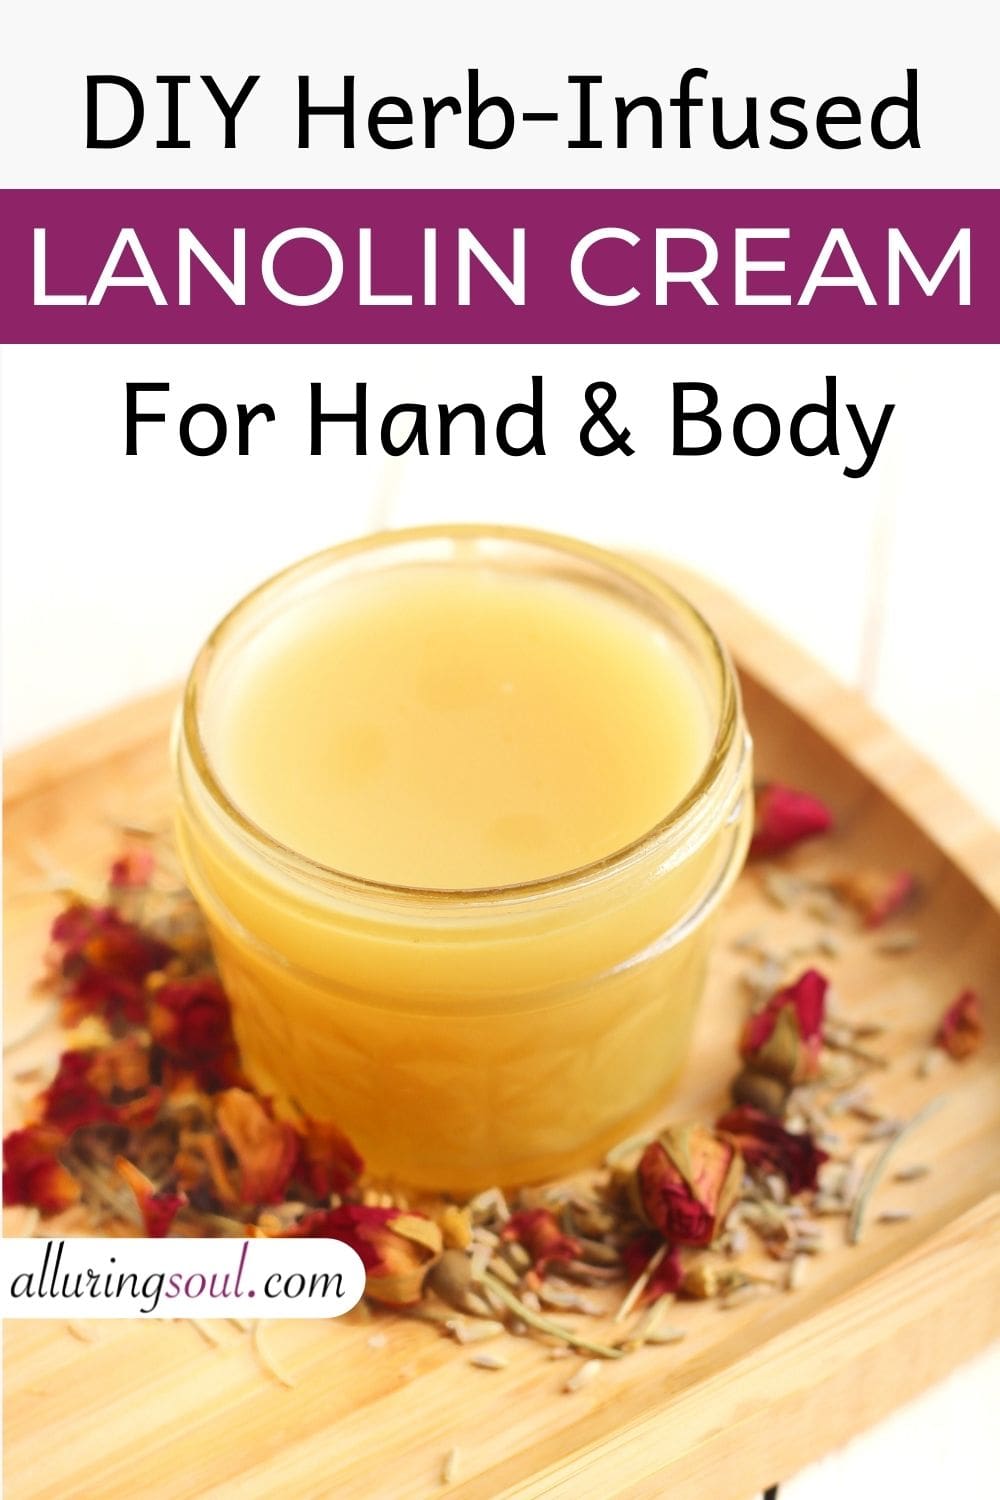 DIY Lanolin Cream For Body And Hand (Herb-Infused)